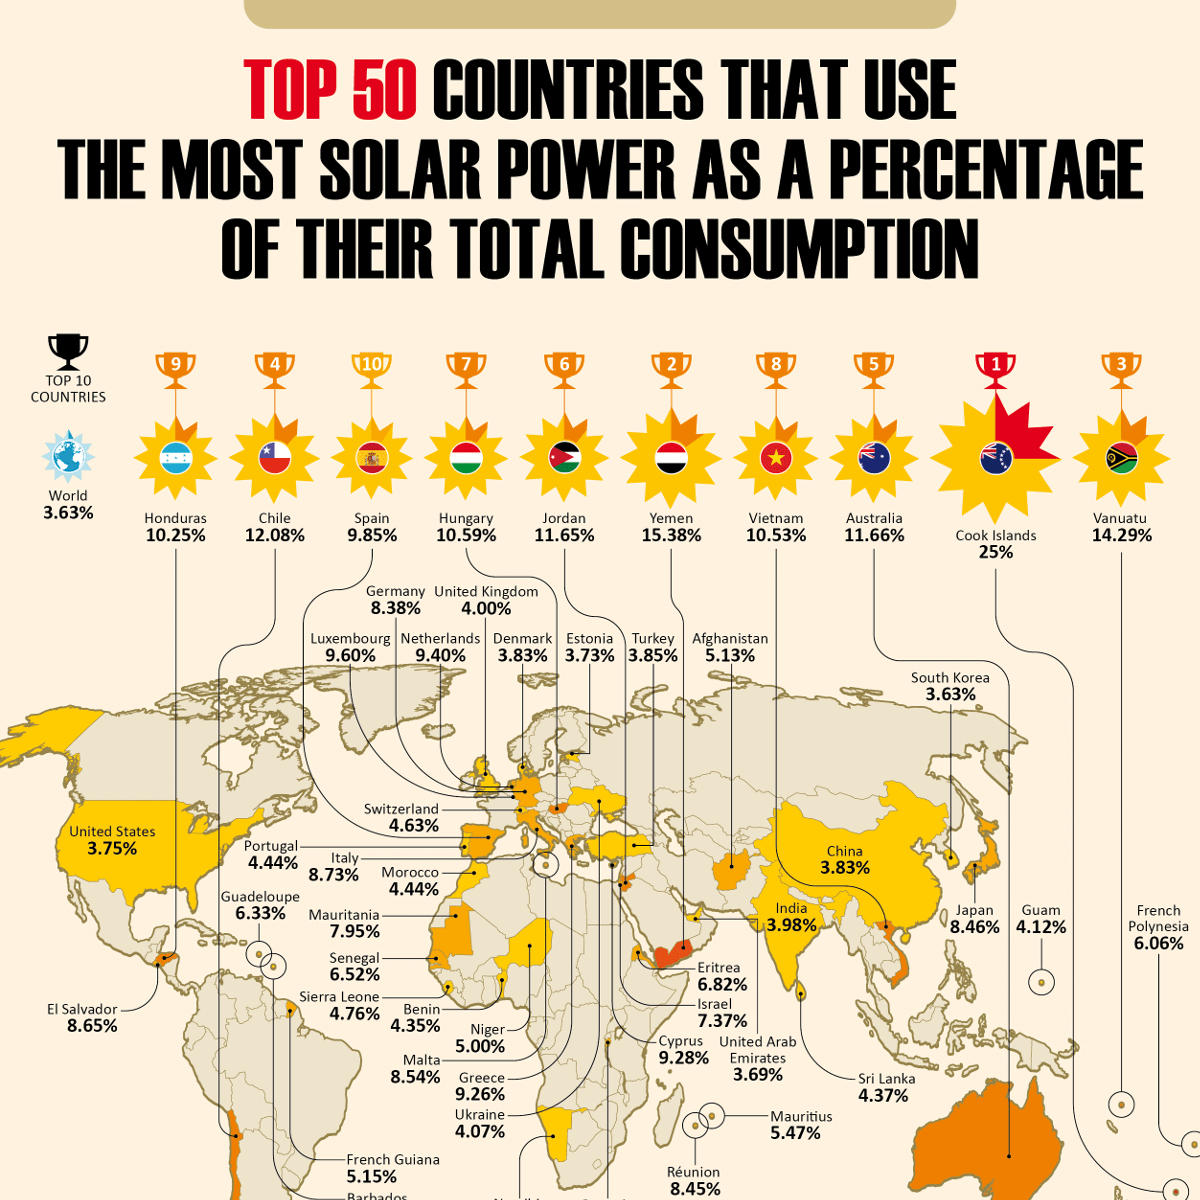 Top 50 Countries That Use the Most Solar Power as a Percentage of Their